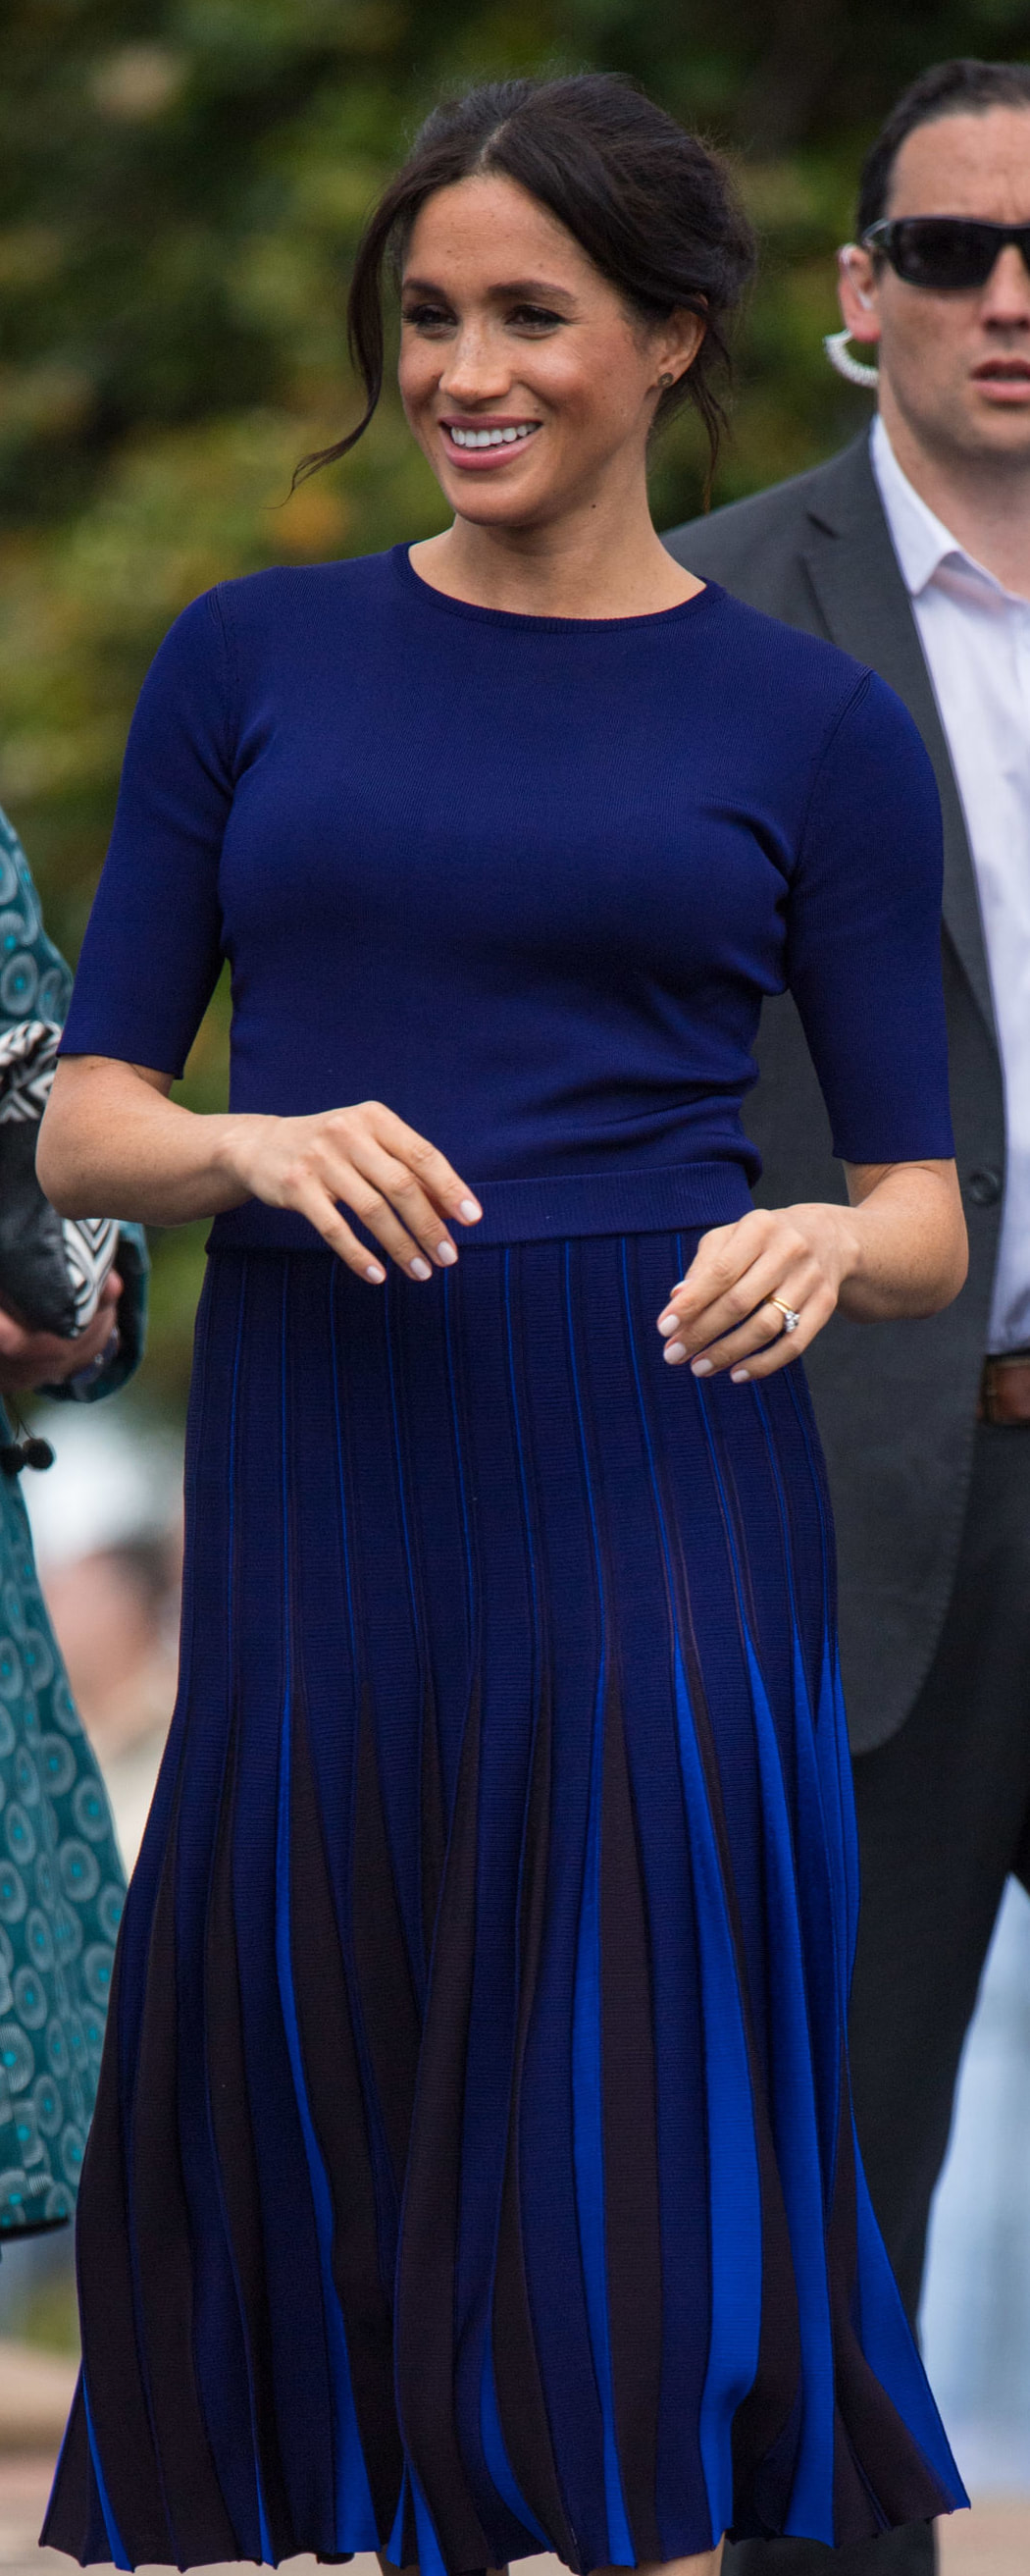 Givenchy Indigo Crew Neck Knit Top as seen on Meghan Markle, the Duchess of Sussex